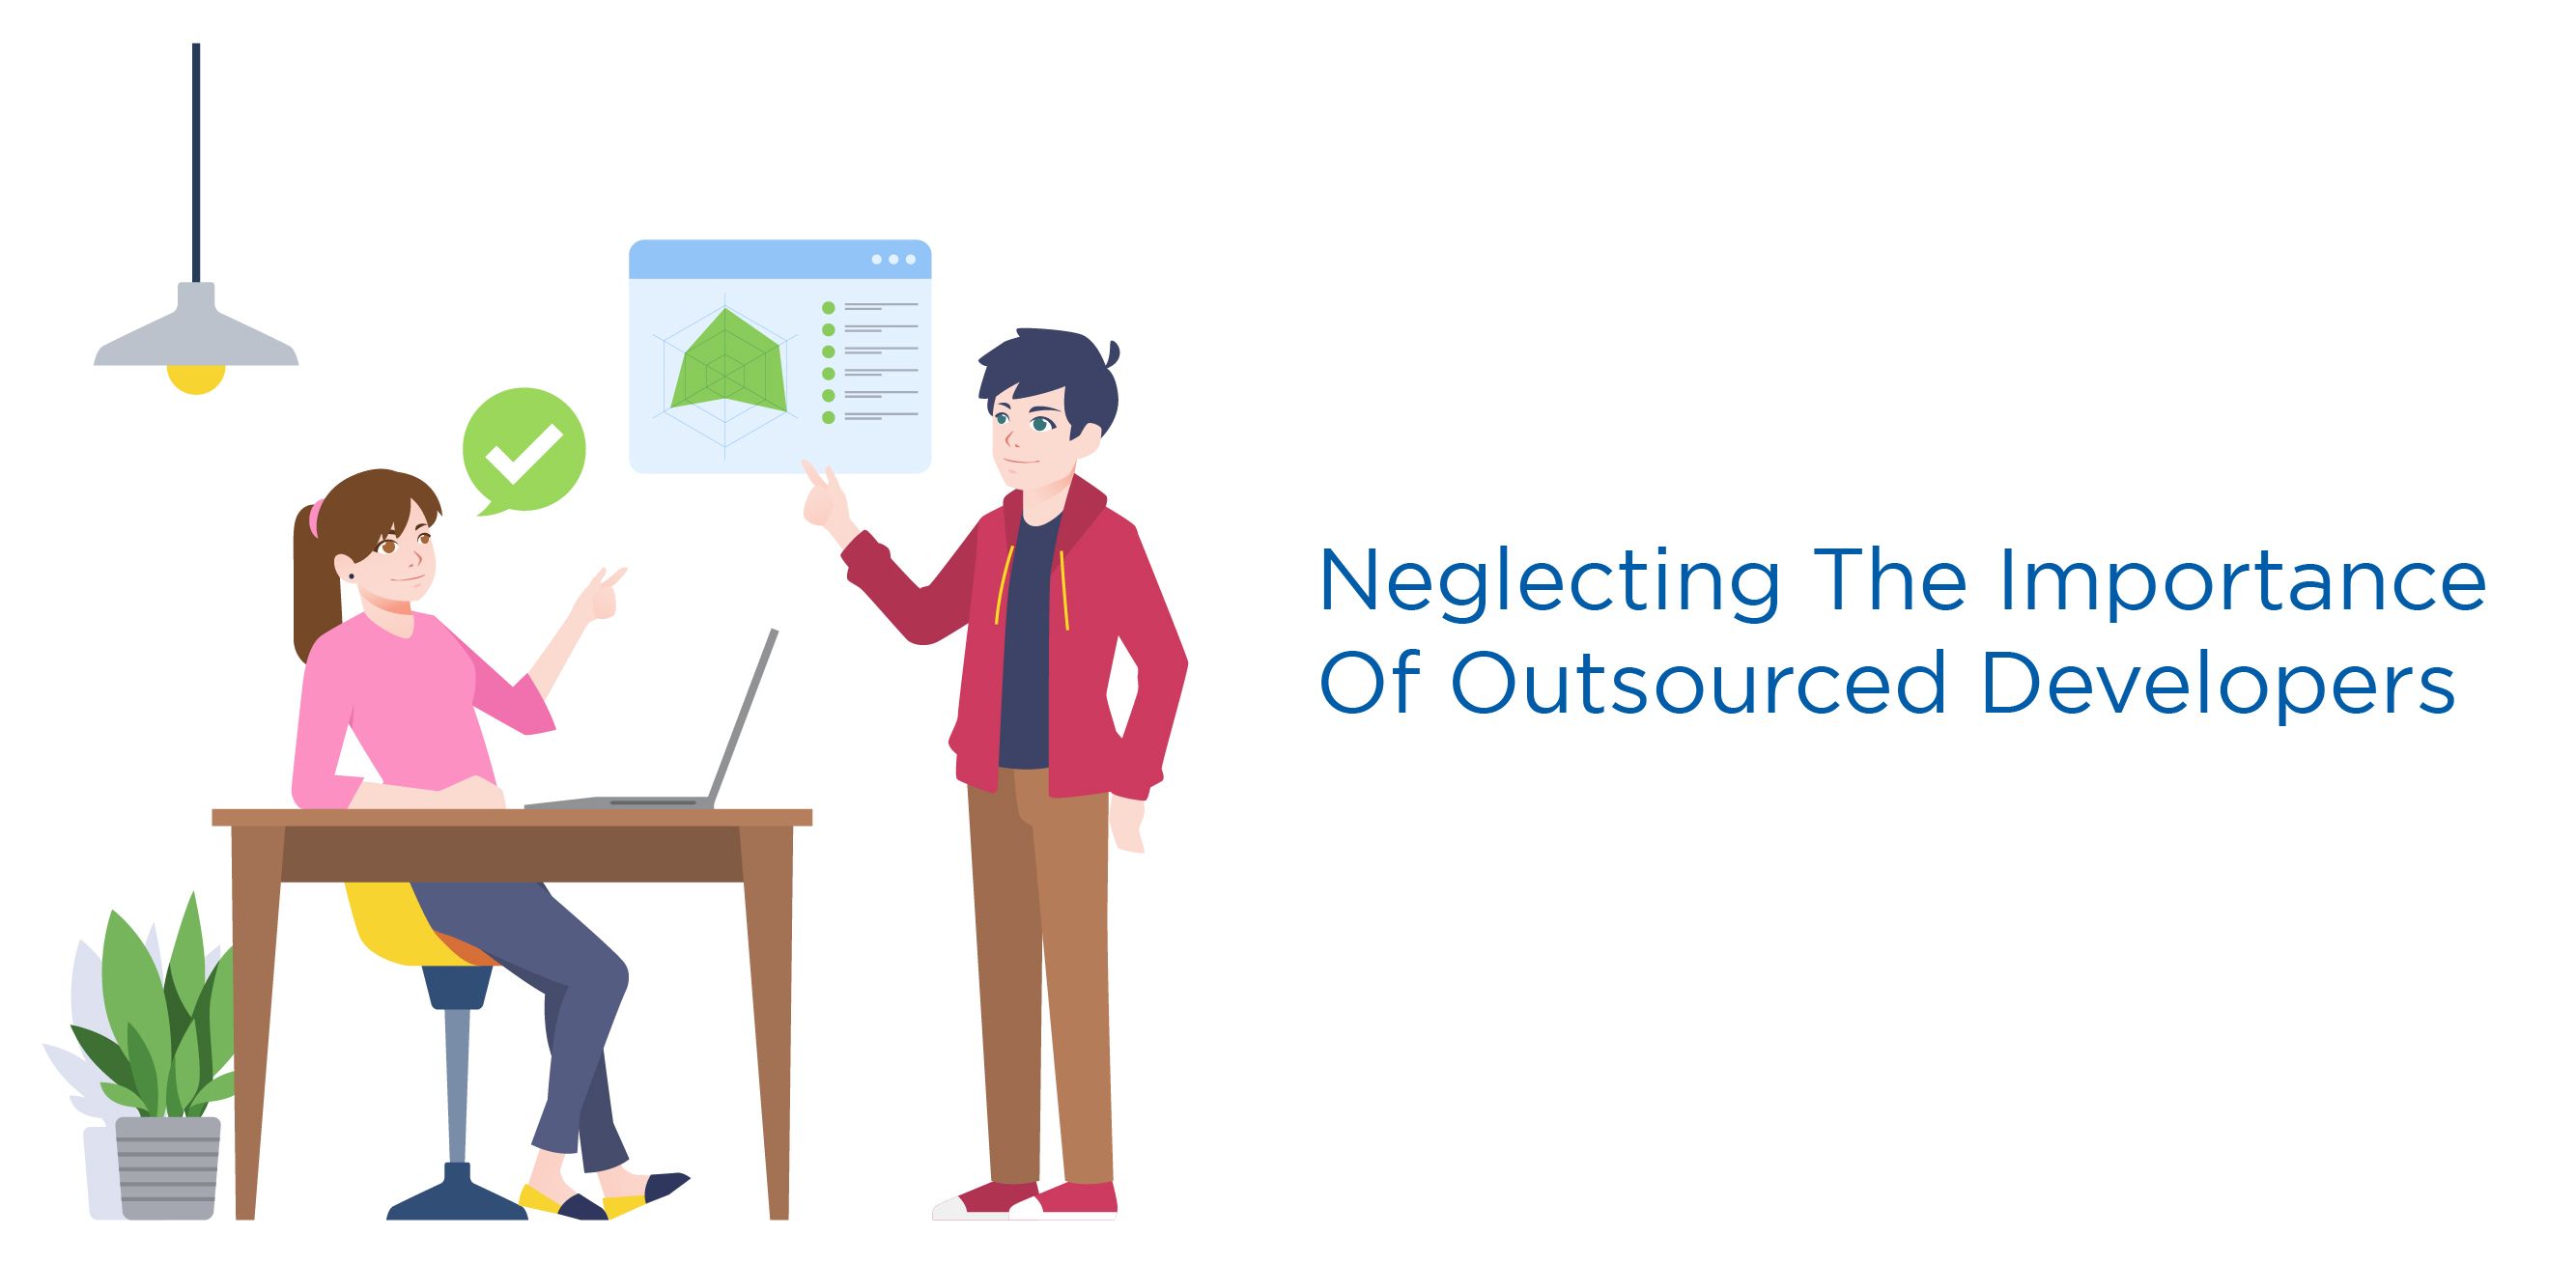 Neglecting The Importance Of Outsourced Developers